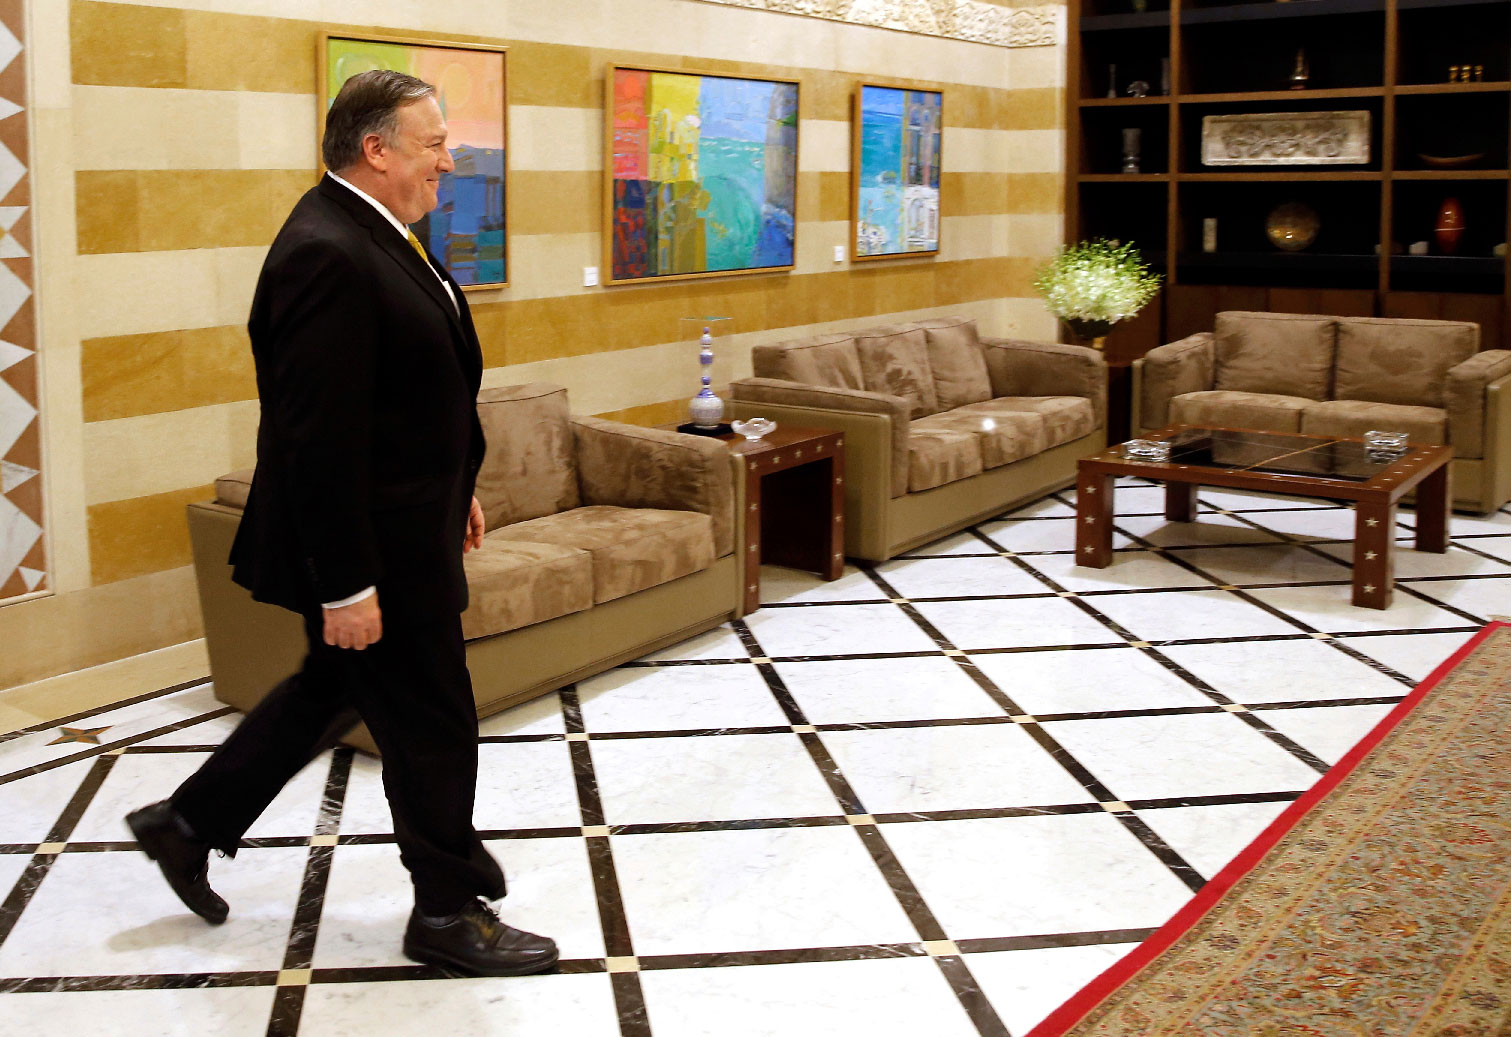 U.S. Secretary of State Mike Pompeo, arrives at the Government House to meets with Lebanese Prime Minister Saad Hariri, in Beirut, Lebanon, Friday, March. 22, 2019.